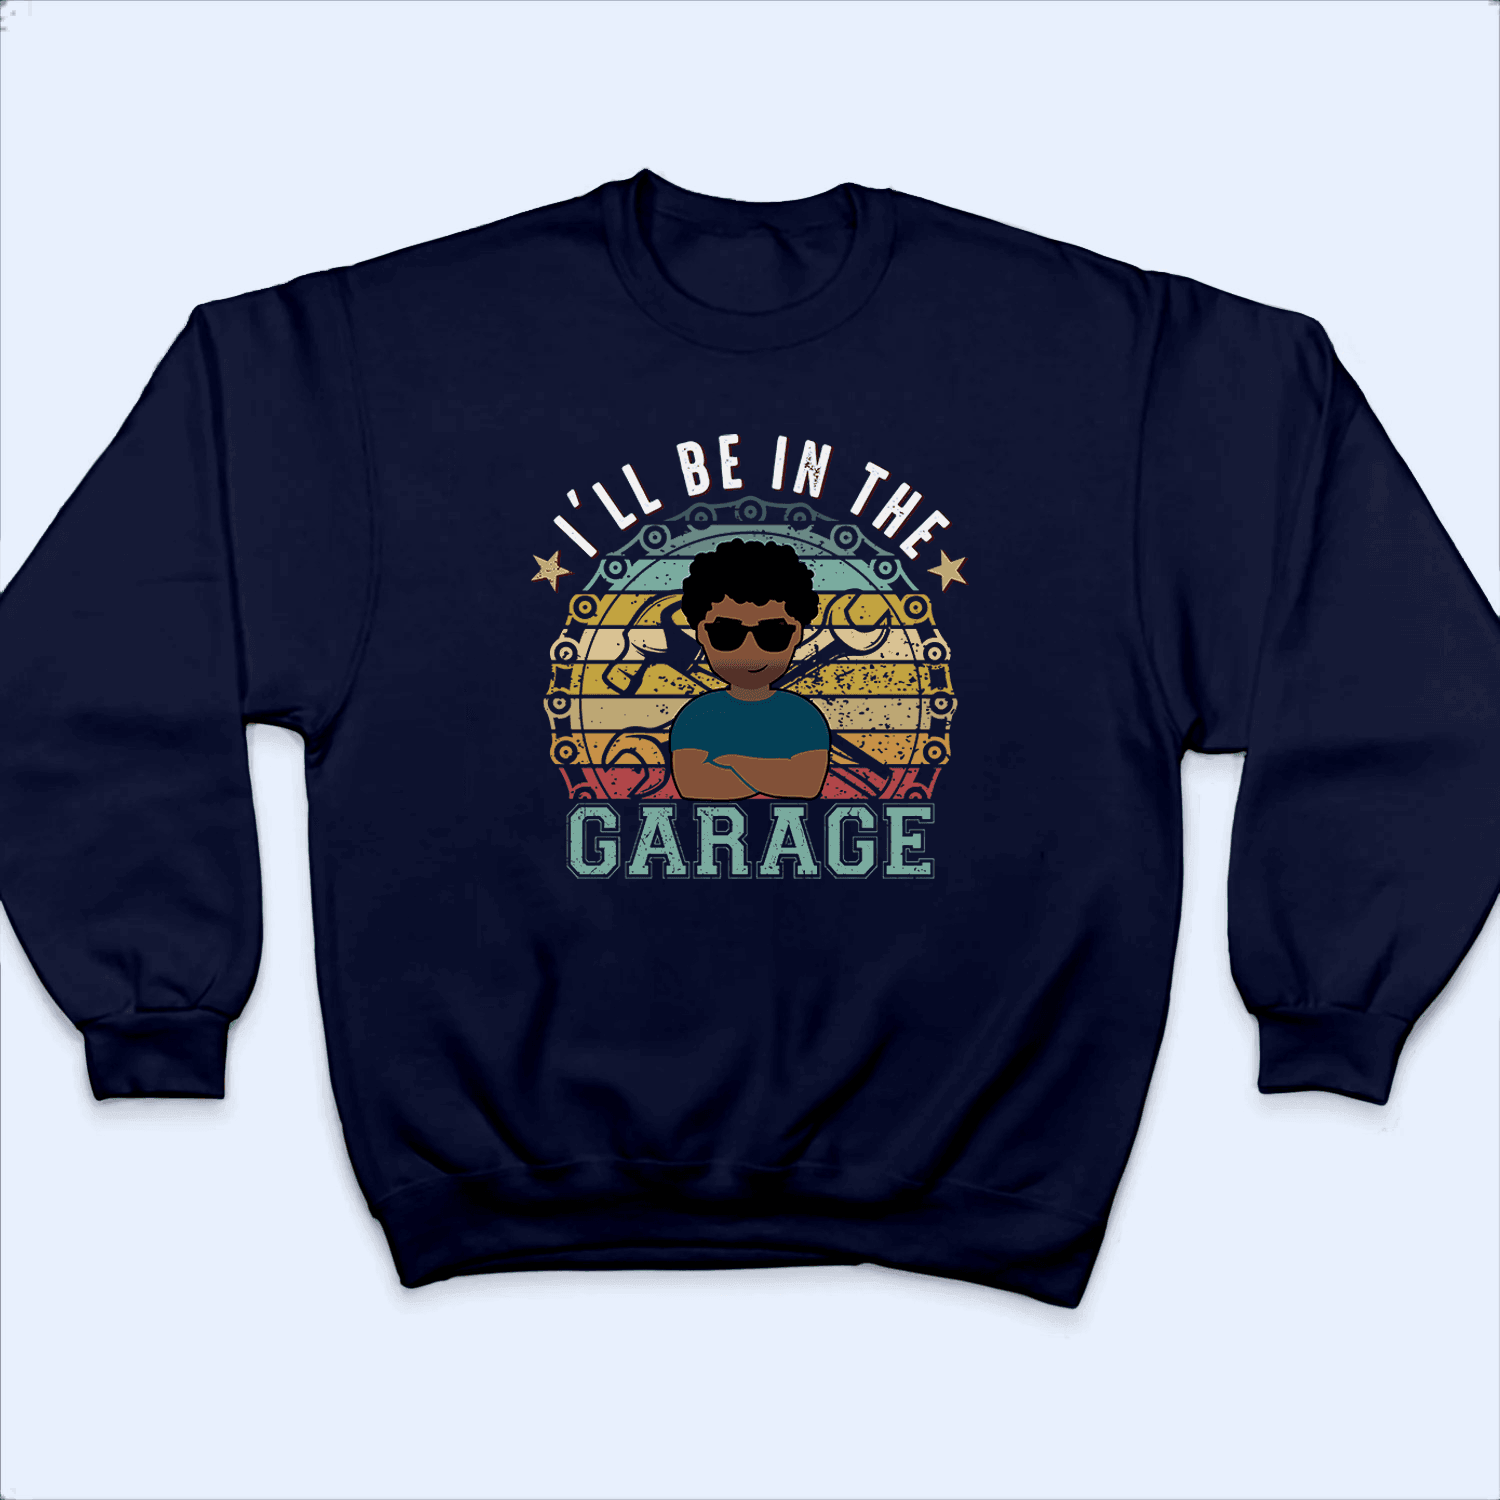 I'll Be In The Garage - Funny Fathers Day - Personalized Custom T Shirt - Birthday, Loving, Funny Gift for Grandfather/Dad/Father, Husband, Grandparent - Suzitee Store